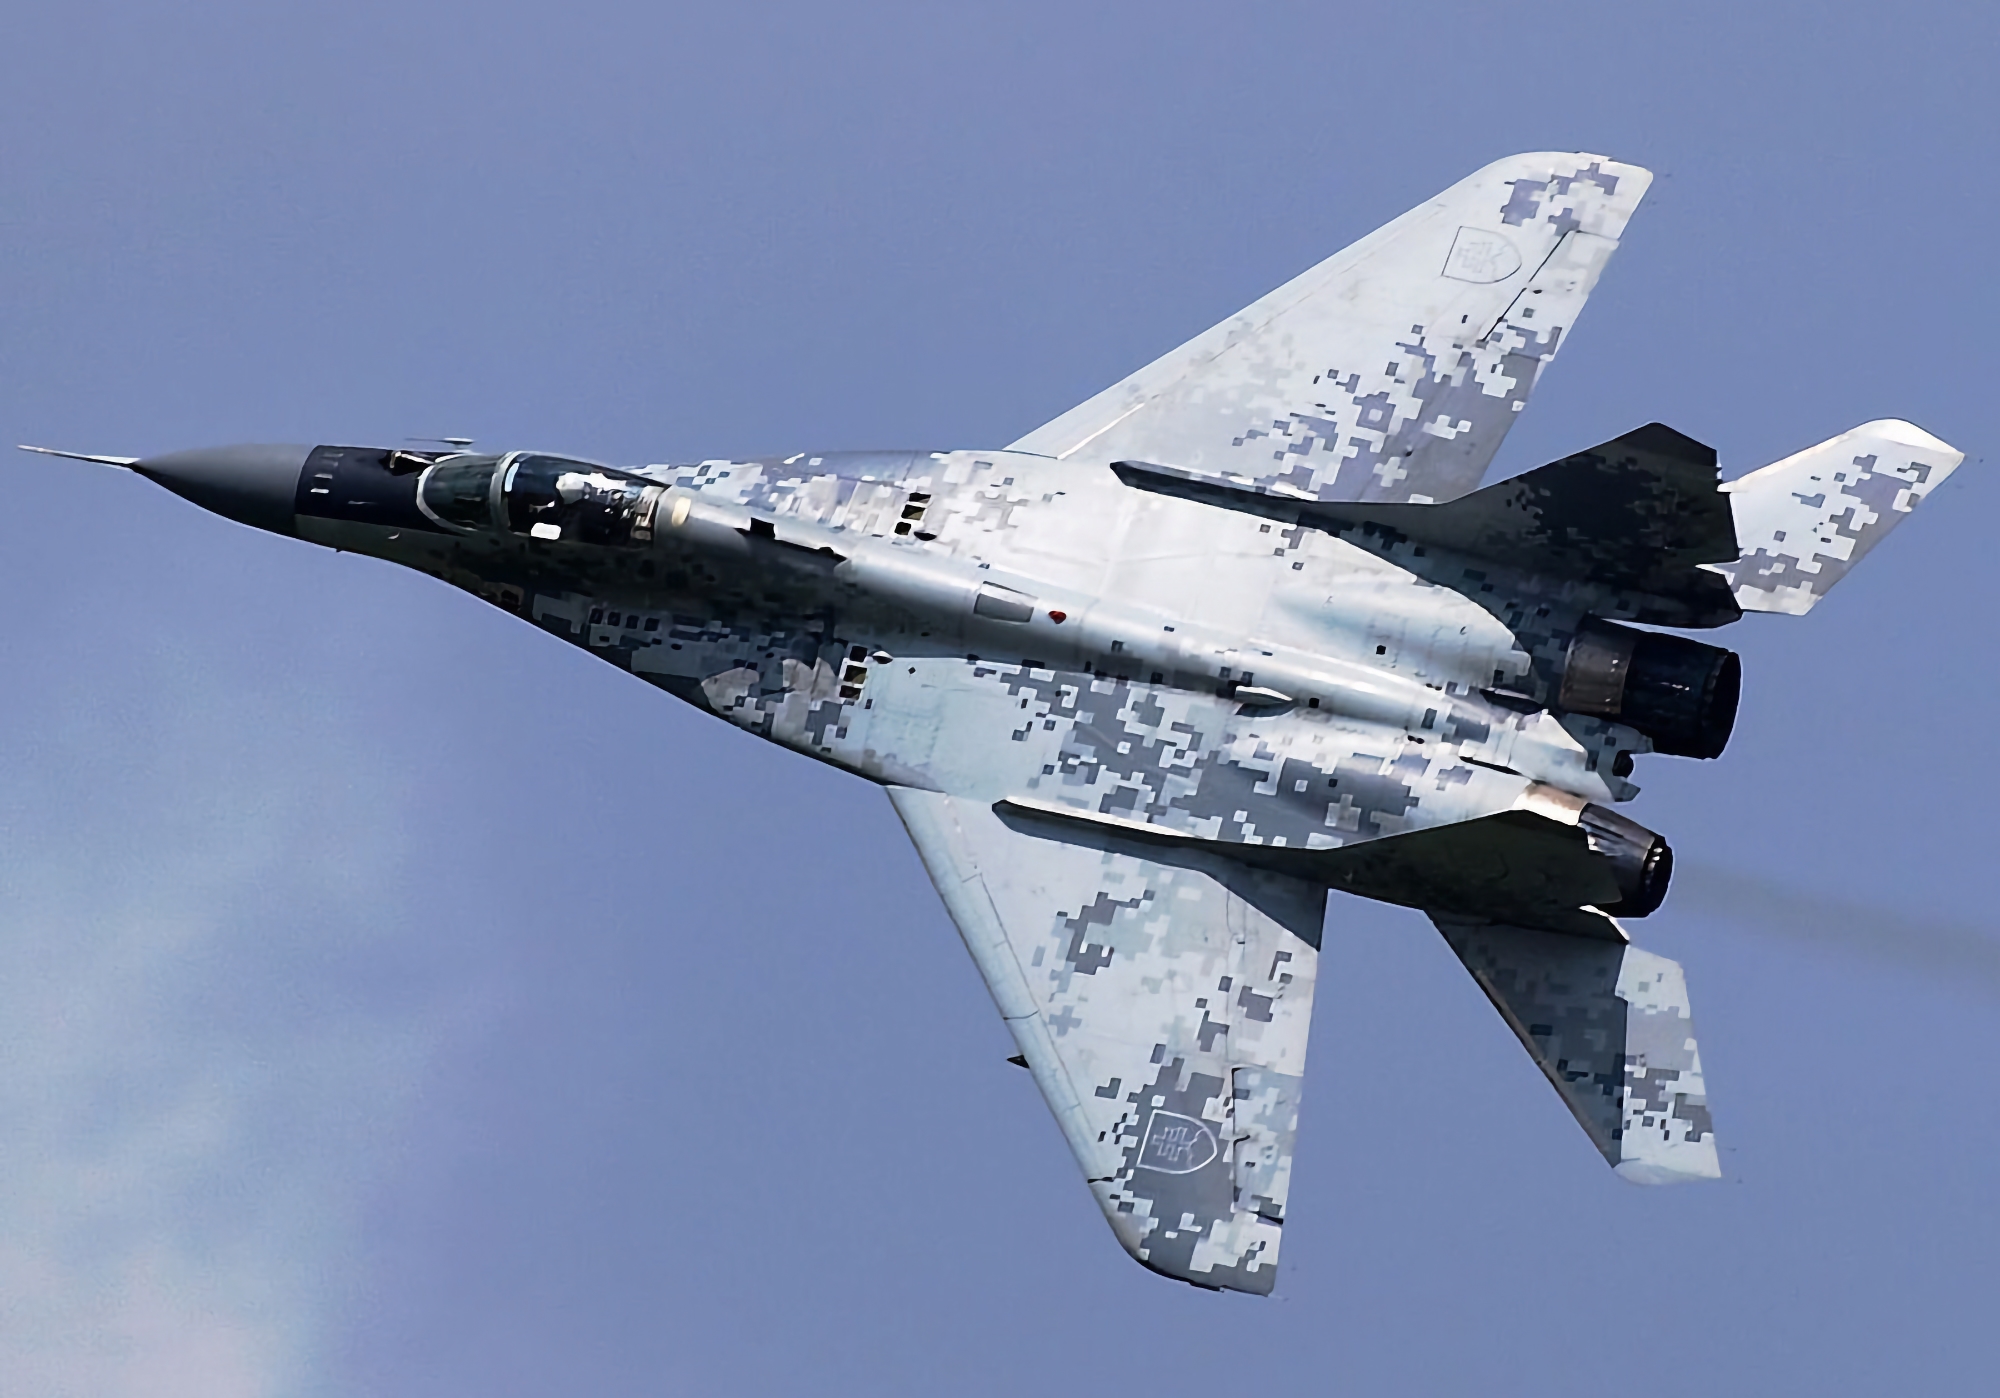 It's official: Slovakia handed over all promised MiG-29 fighter jets to Ukraine